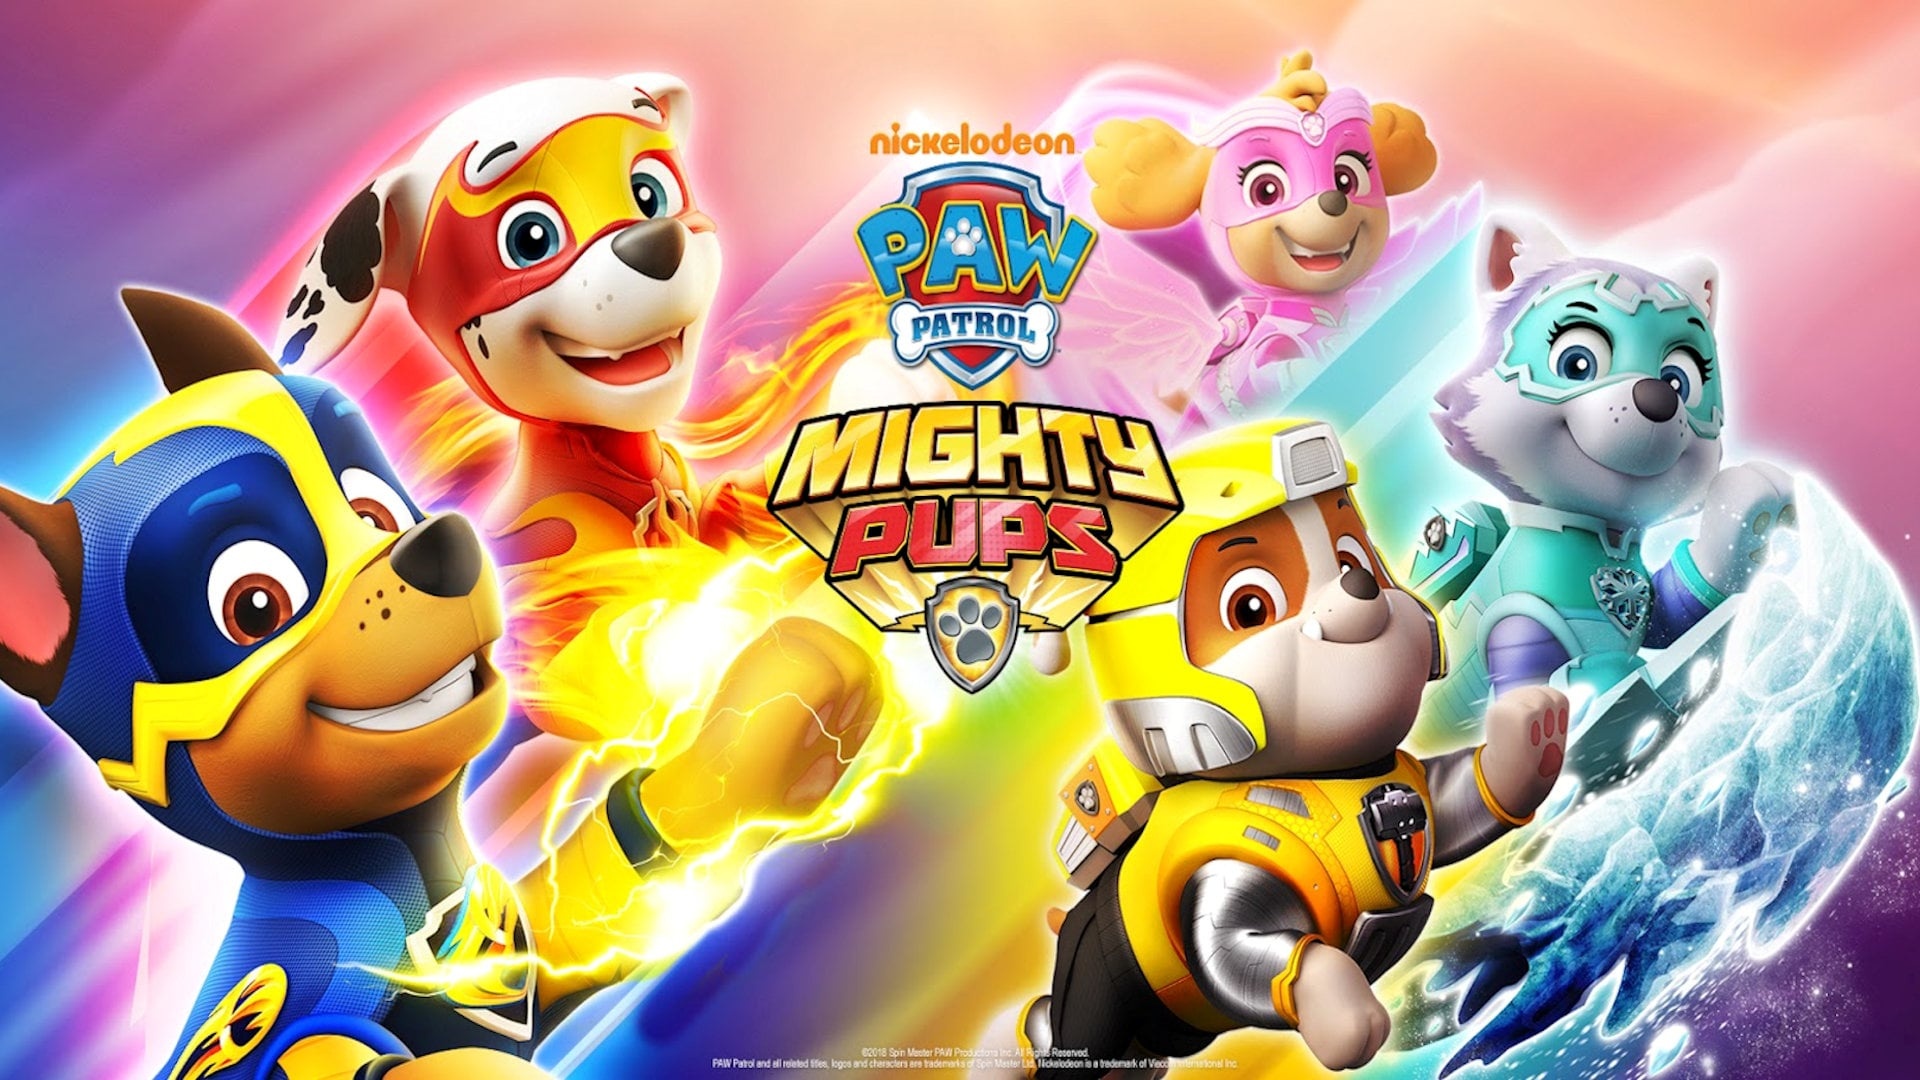 Paw Patrol: Mighty Pups - Official Trailer The